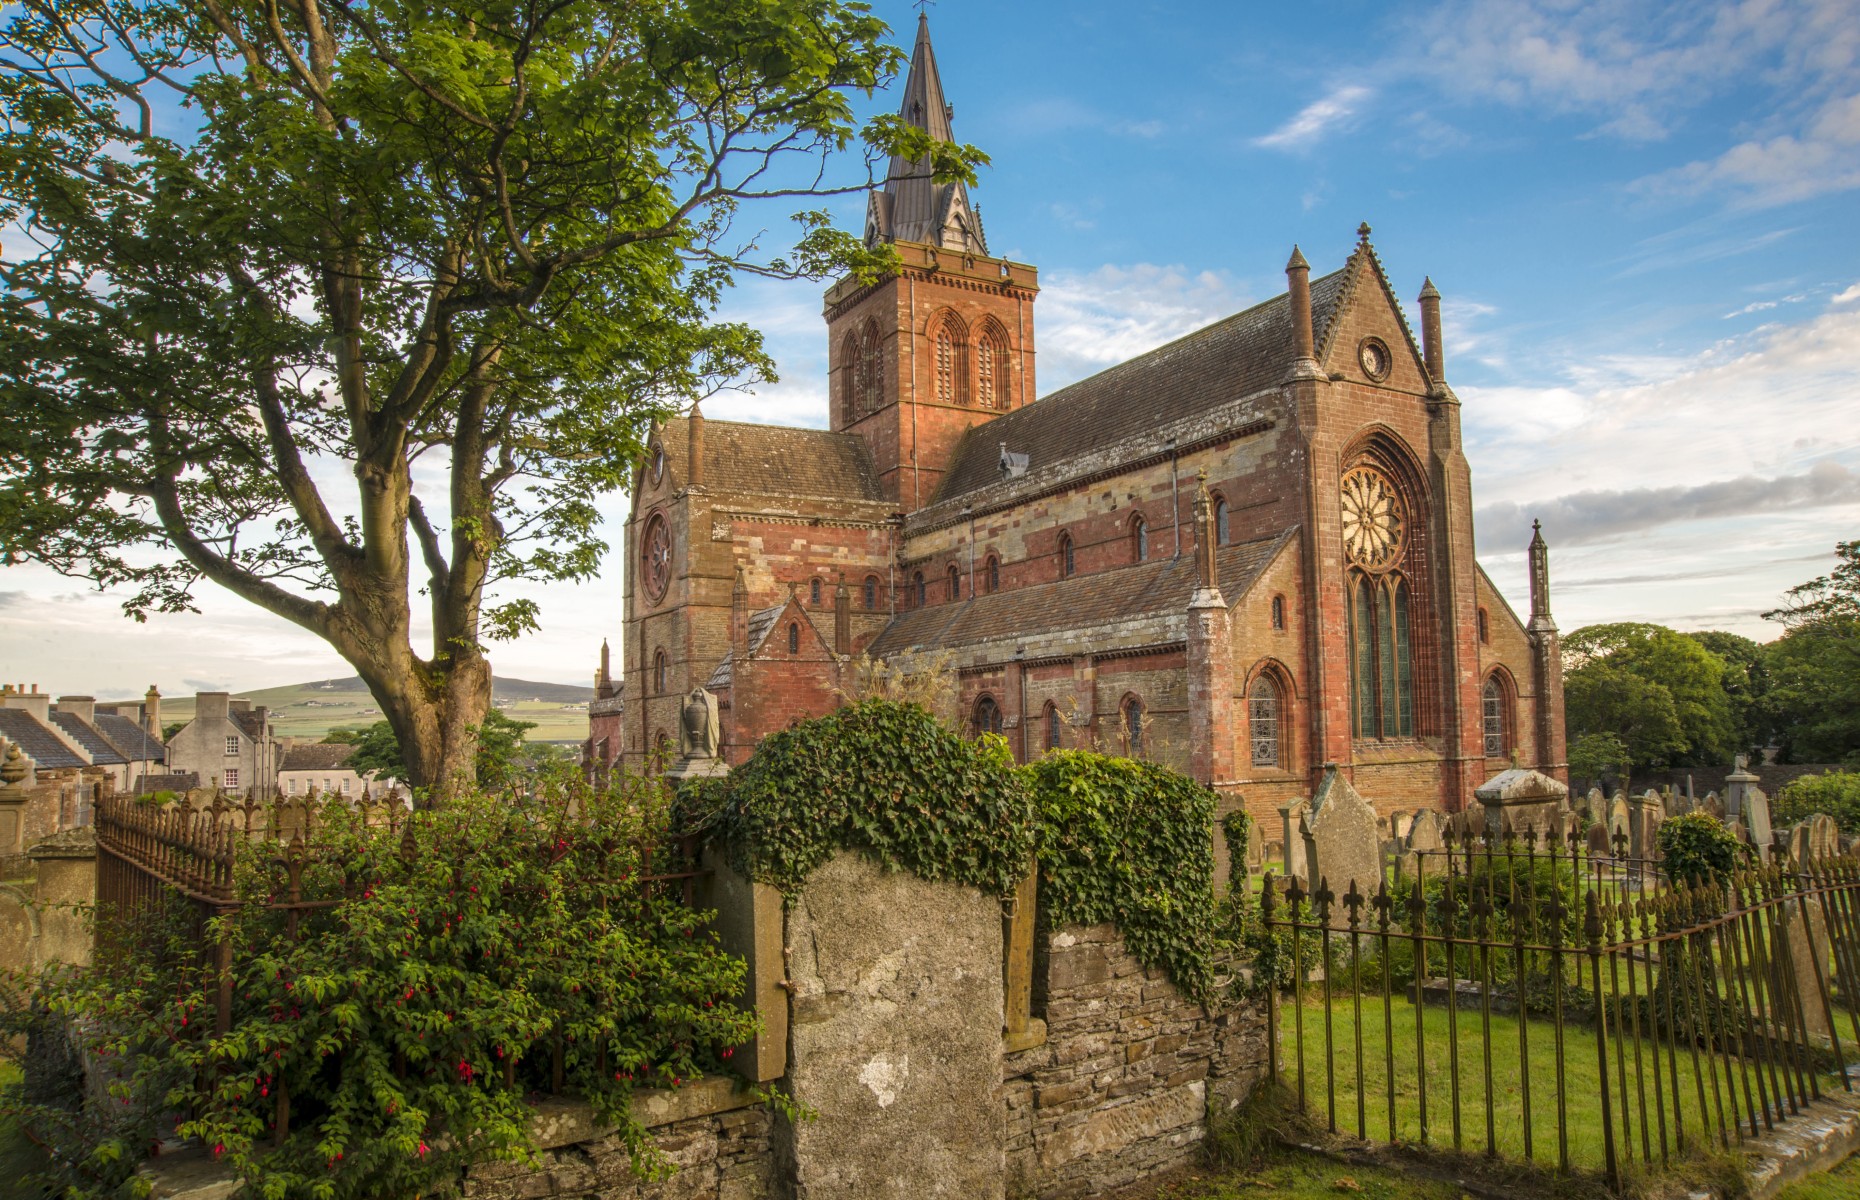 St Magnus Cathedral (Ian Cooper/Shutterstock)